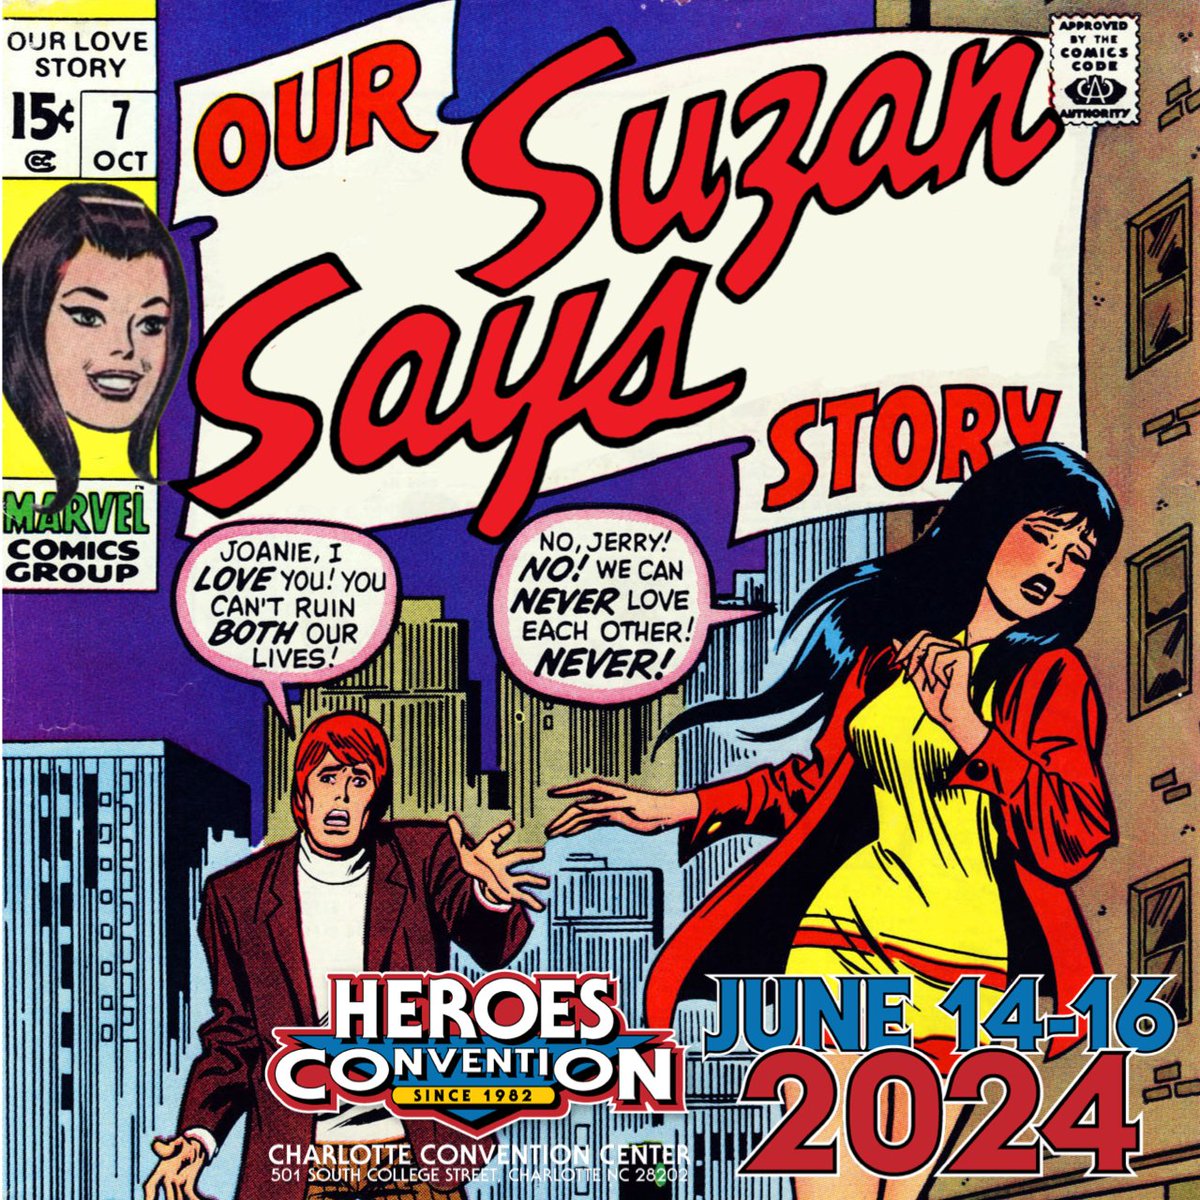 Marvel's romance comics advice maven SUZAN LANE LOEB is making her triumphant return to HeroesCon, June 14-16! Which is great, because I still ain't acting right! #suzansays #marvelinthe70s #marvelromance Tickets: heroesonline.com/heroescon/tick… Guest List: heroesonline.com/heroescon/feat…